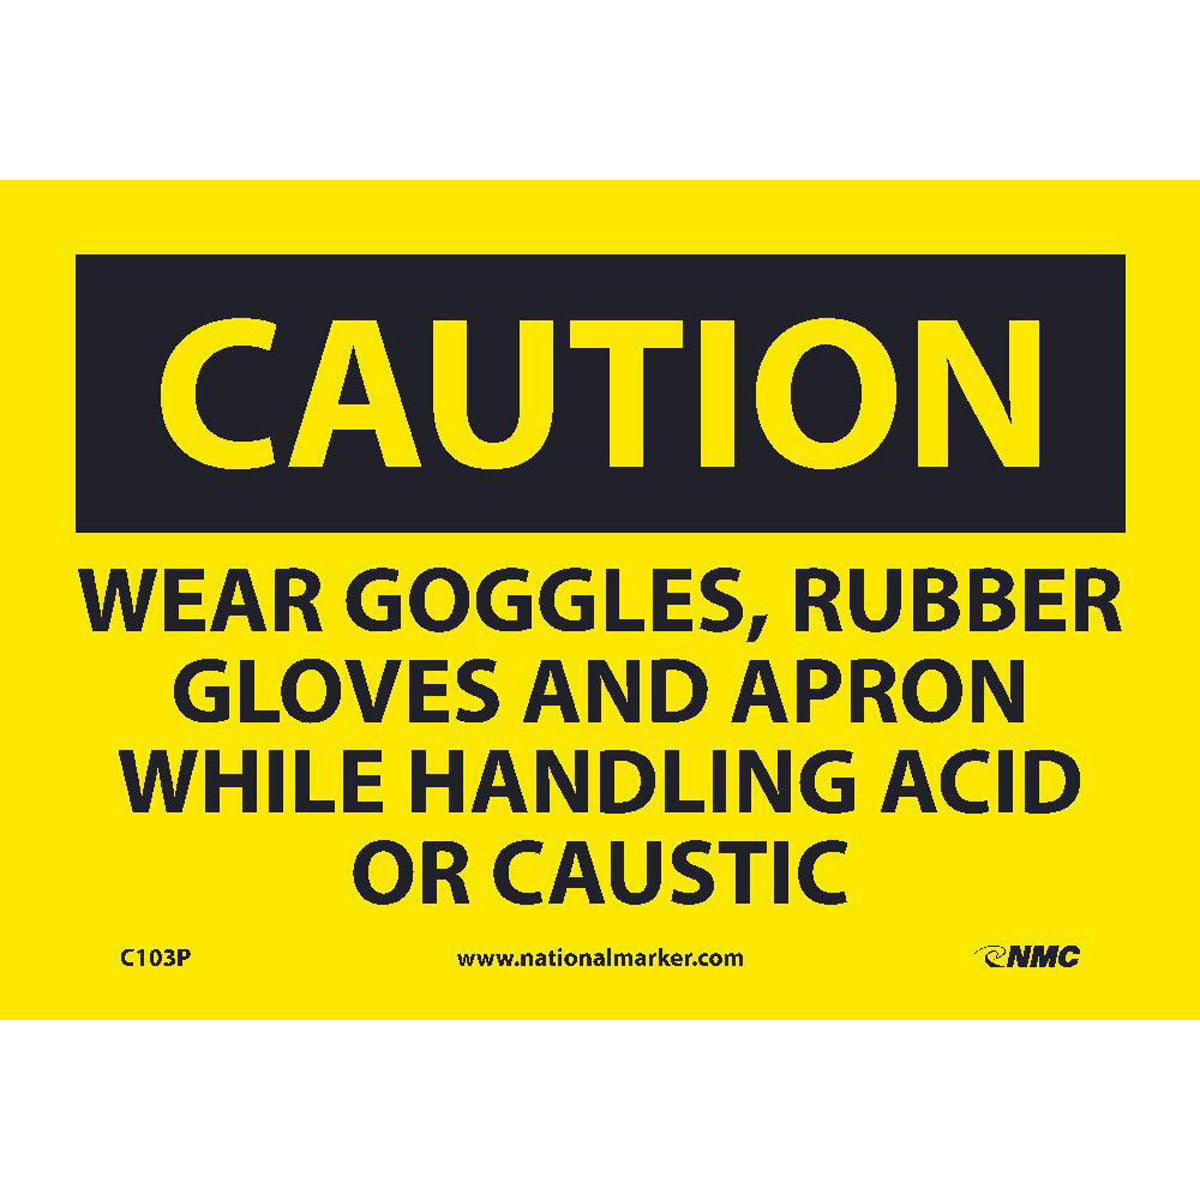 NM 7" X 10" Yellow .0045" Pressure Sensitive Vinyl Personal Protective Equipment Sign "CAUTION WEAR GOGGLES RUBBER GLOVES AND APRON WHILE HANDLING ACID OR CAUSTIC"